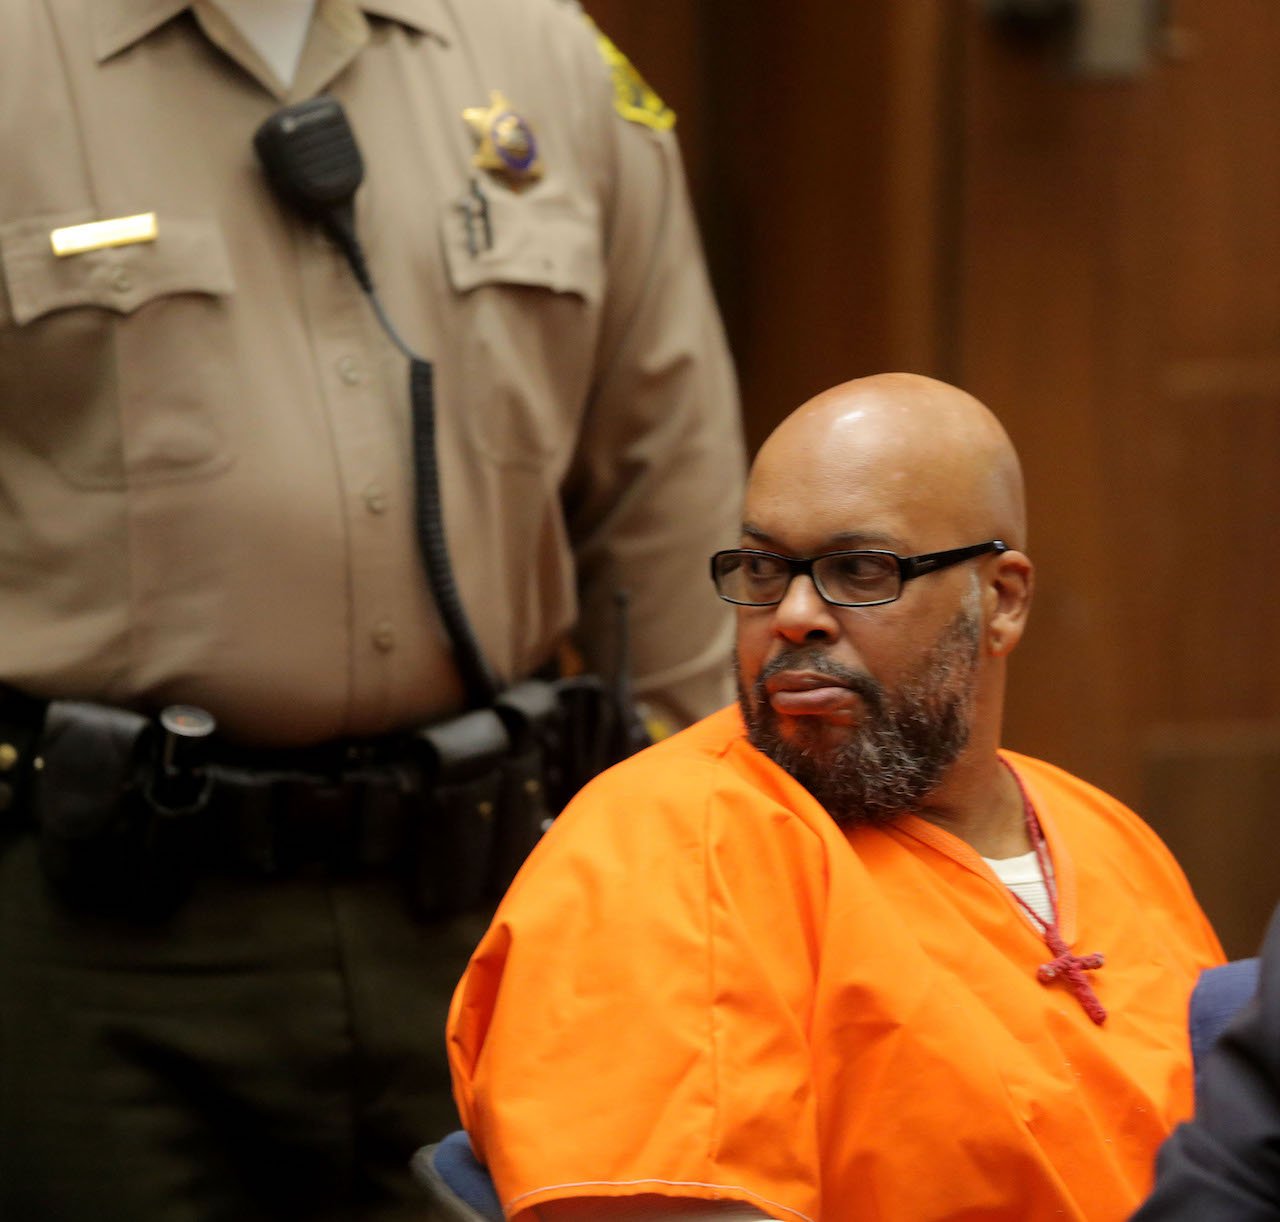 Suge Knight in courtroom; a dispute over publishing caused his issue with Vanilla Ice